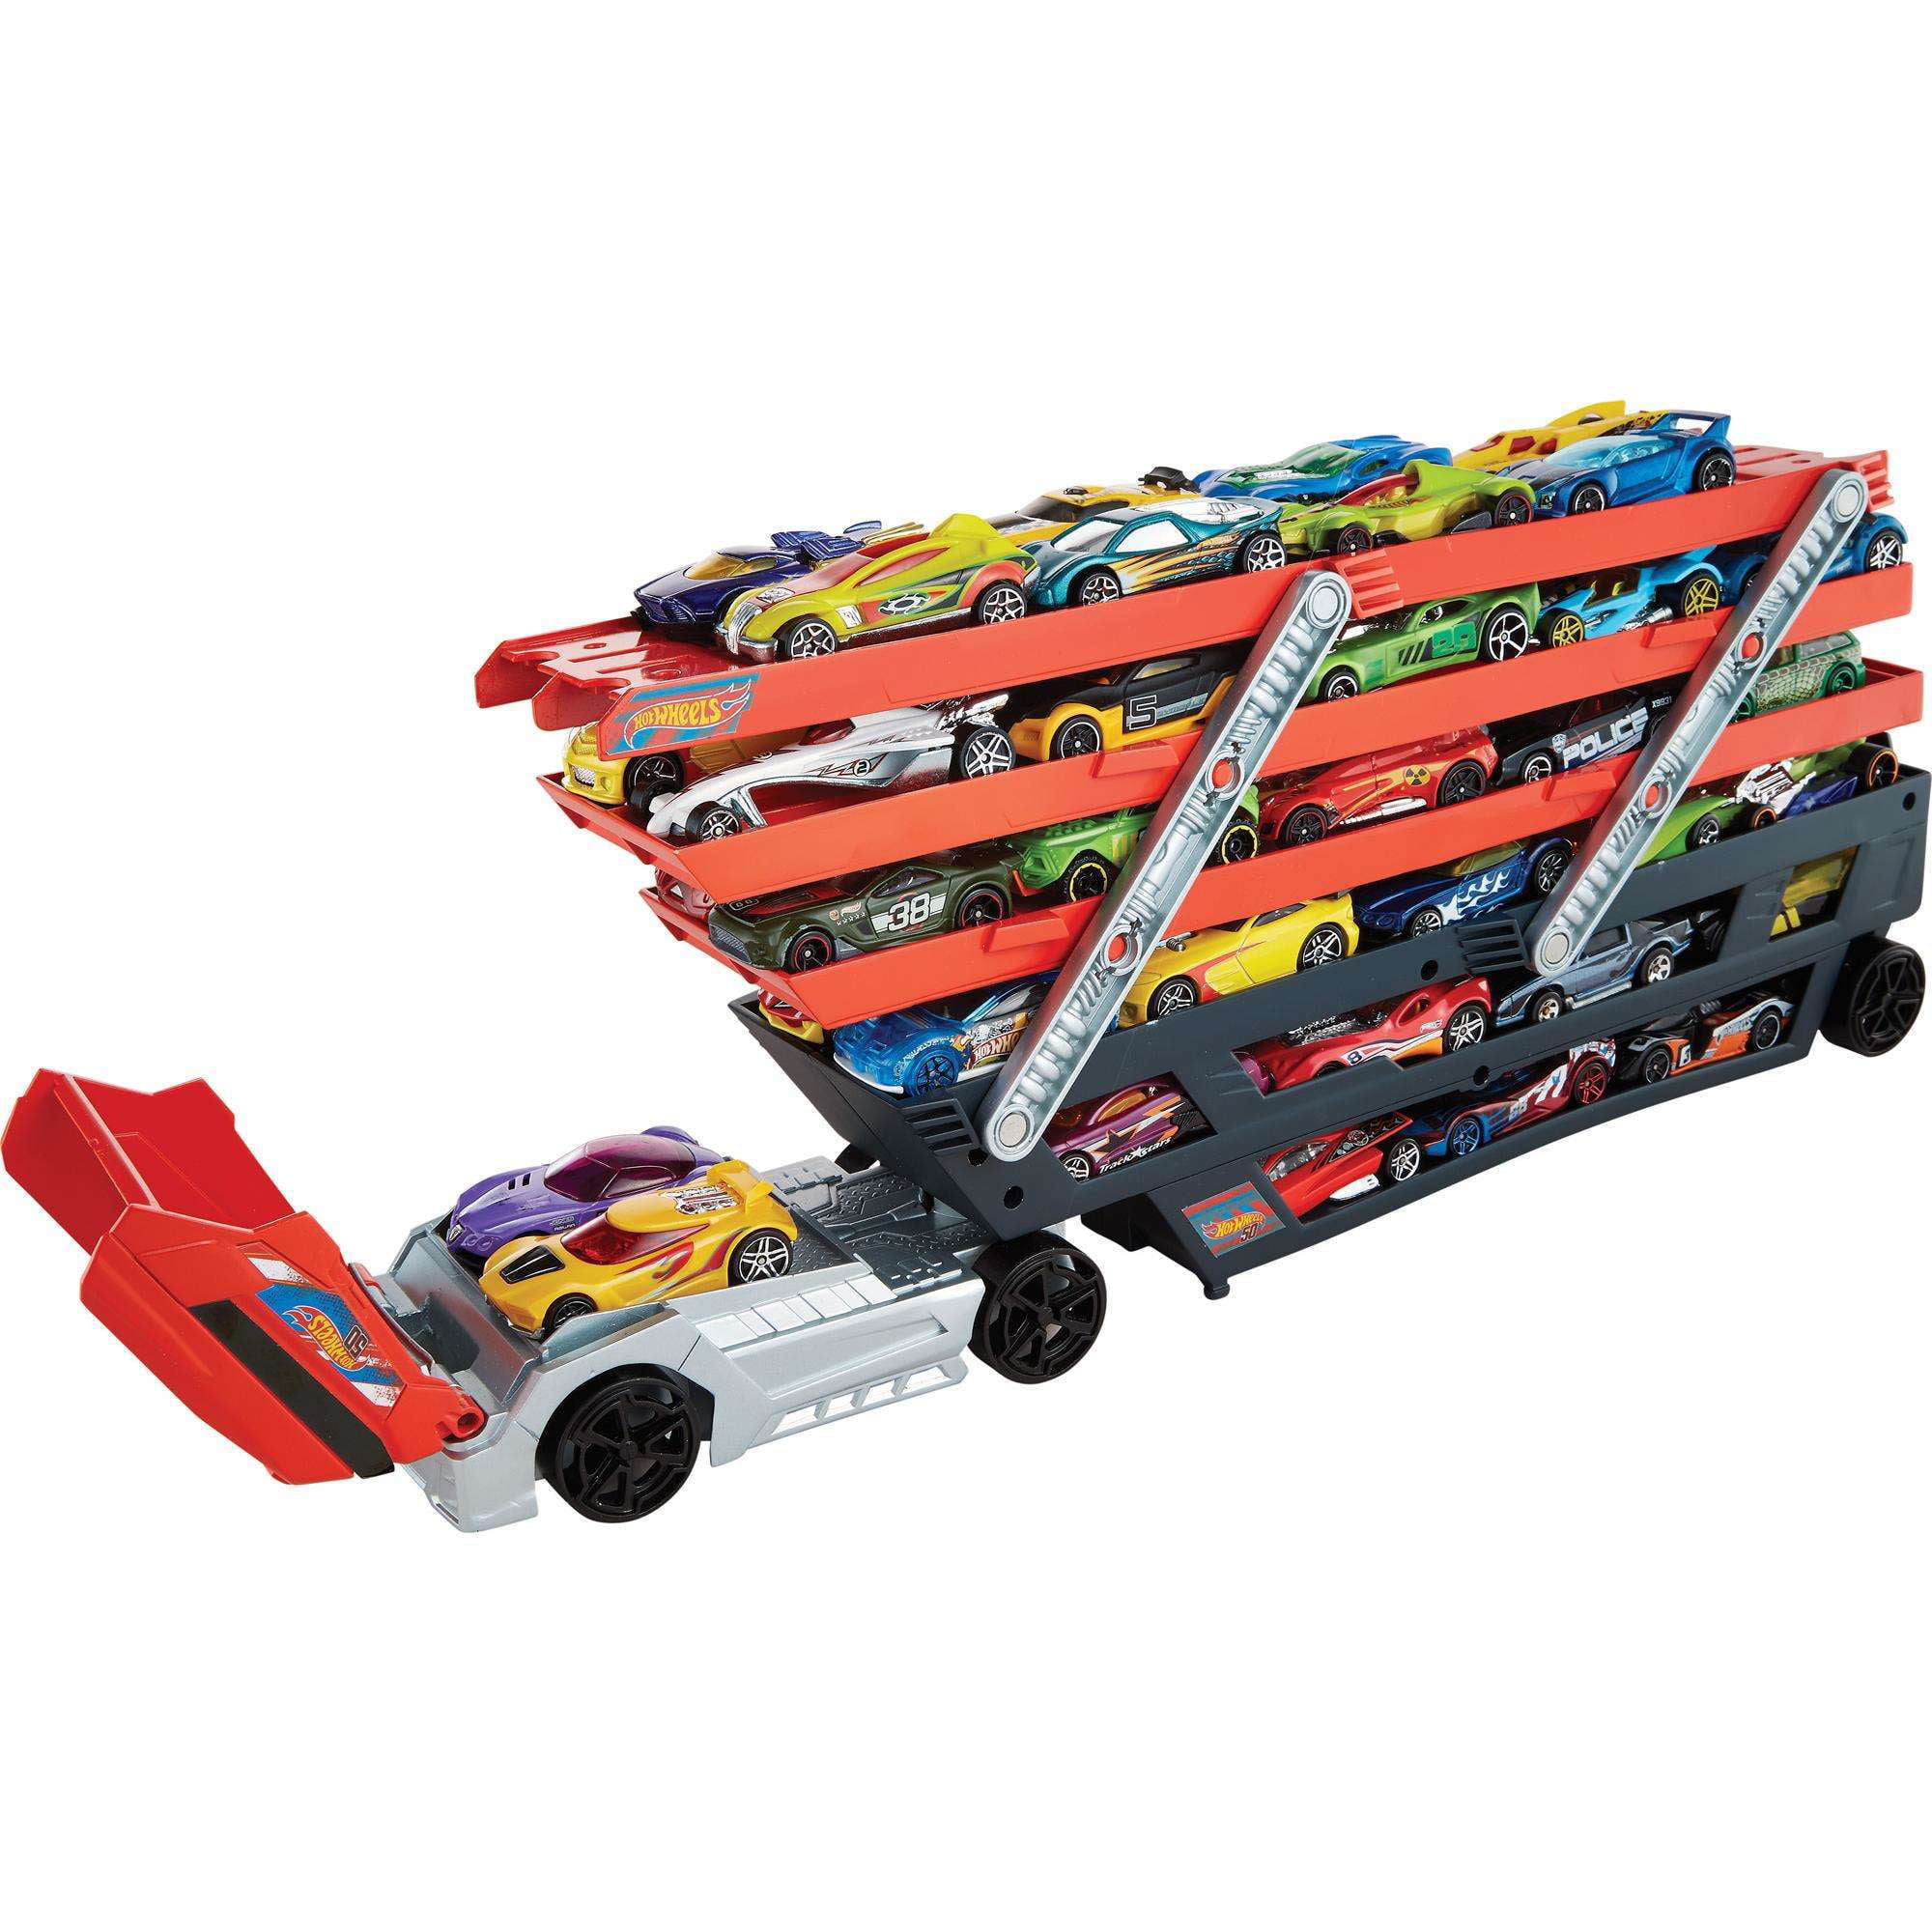 Hot Wheels Playset with Hw MEGA Hauler Toy Truck & 1:64 Scale Car, Stores  50+ Vehicles, Expands to 6 Levels